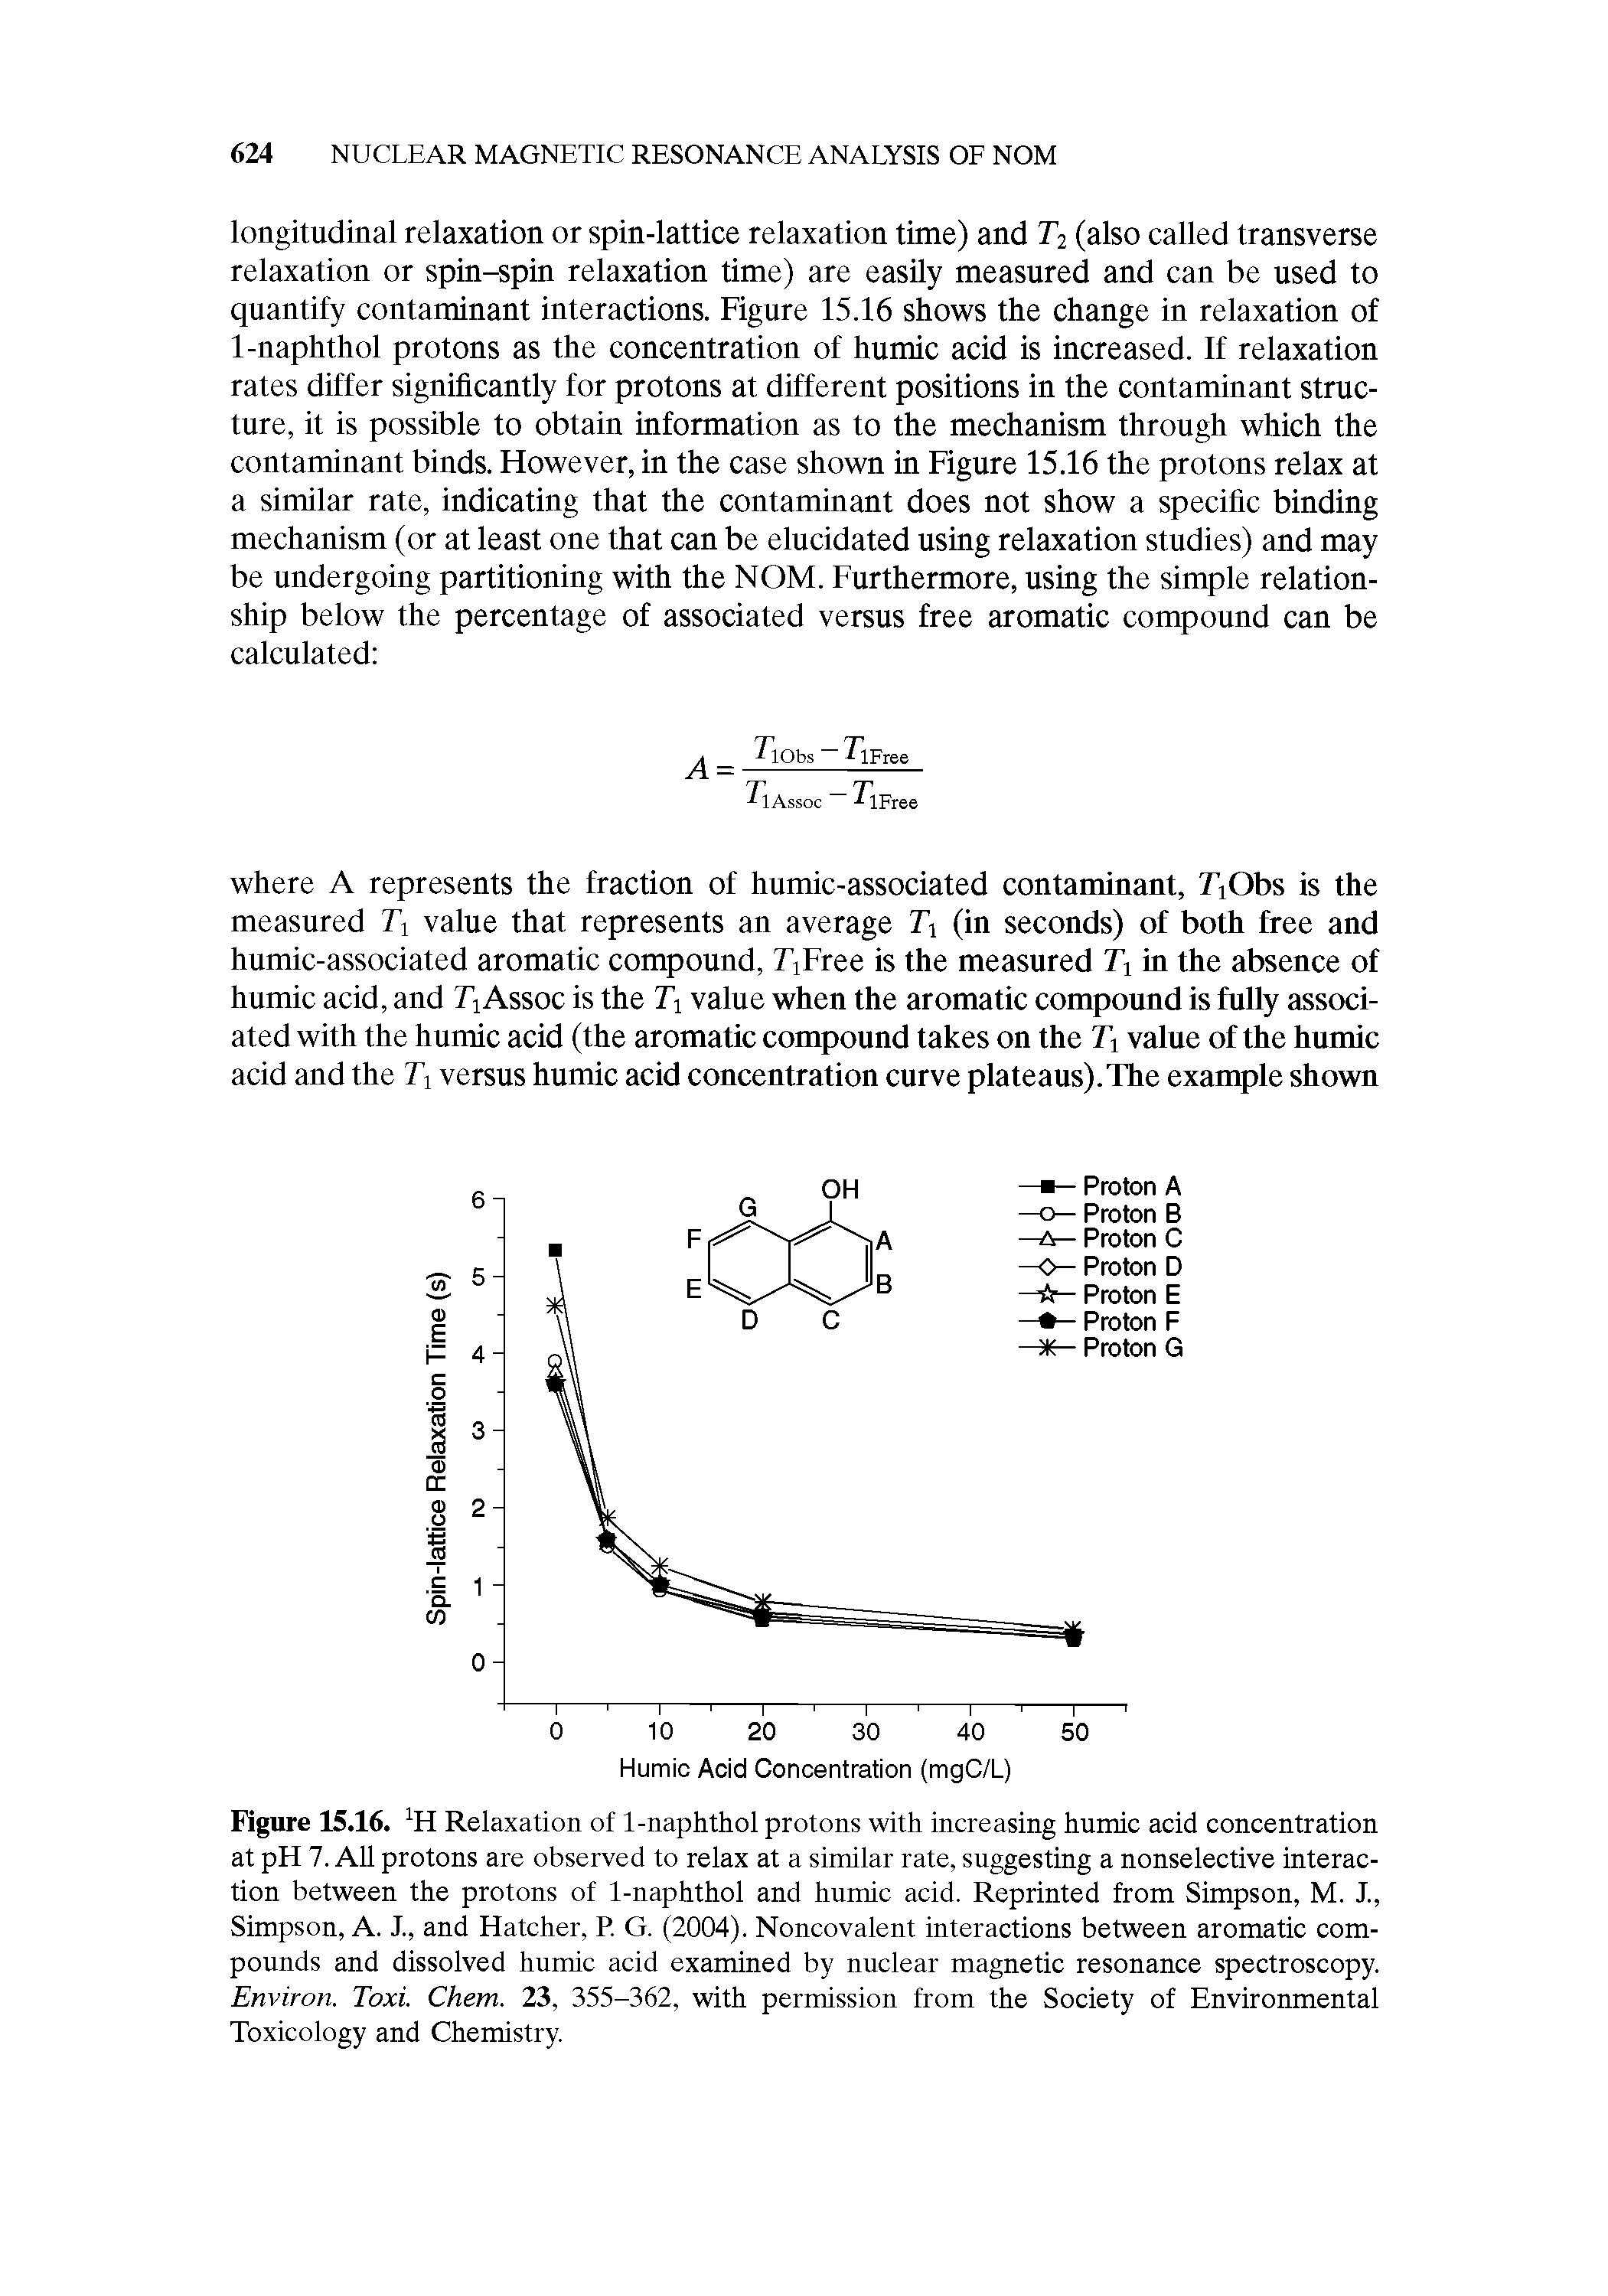 Figure 15.16. H Relaxation of 1-naphthol protons with increasing humic acid concentration at pH 7. All protons are observed to relax at a similar rate, suggesting a nonselective interaction between the protons of 1-naphthol and humic acid. Reprinted from Simpson, M. I, Simpson, A. J., and Hatcher, R G. (2004). Noncovalent interactions between aromatic compounds and dissolved humic acid examined by nuclear magnetic resonance spectroscopy. Environ. Toxi. Chem. 23, 355-362, with permission from the Society of Environmental Toxicology and Chemistry.